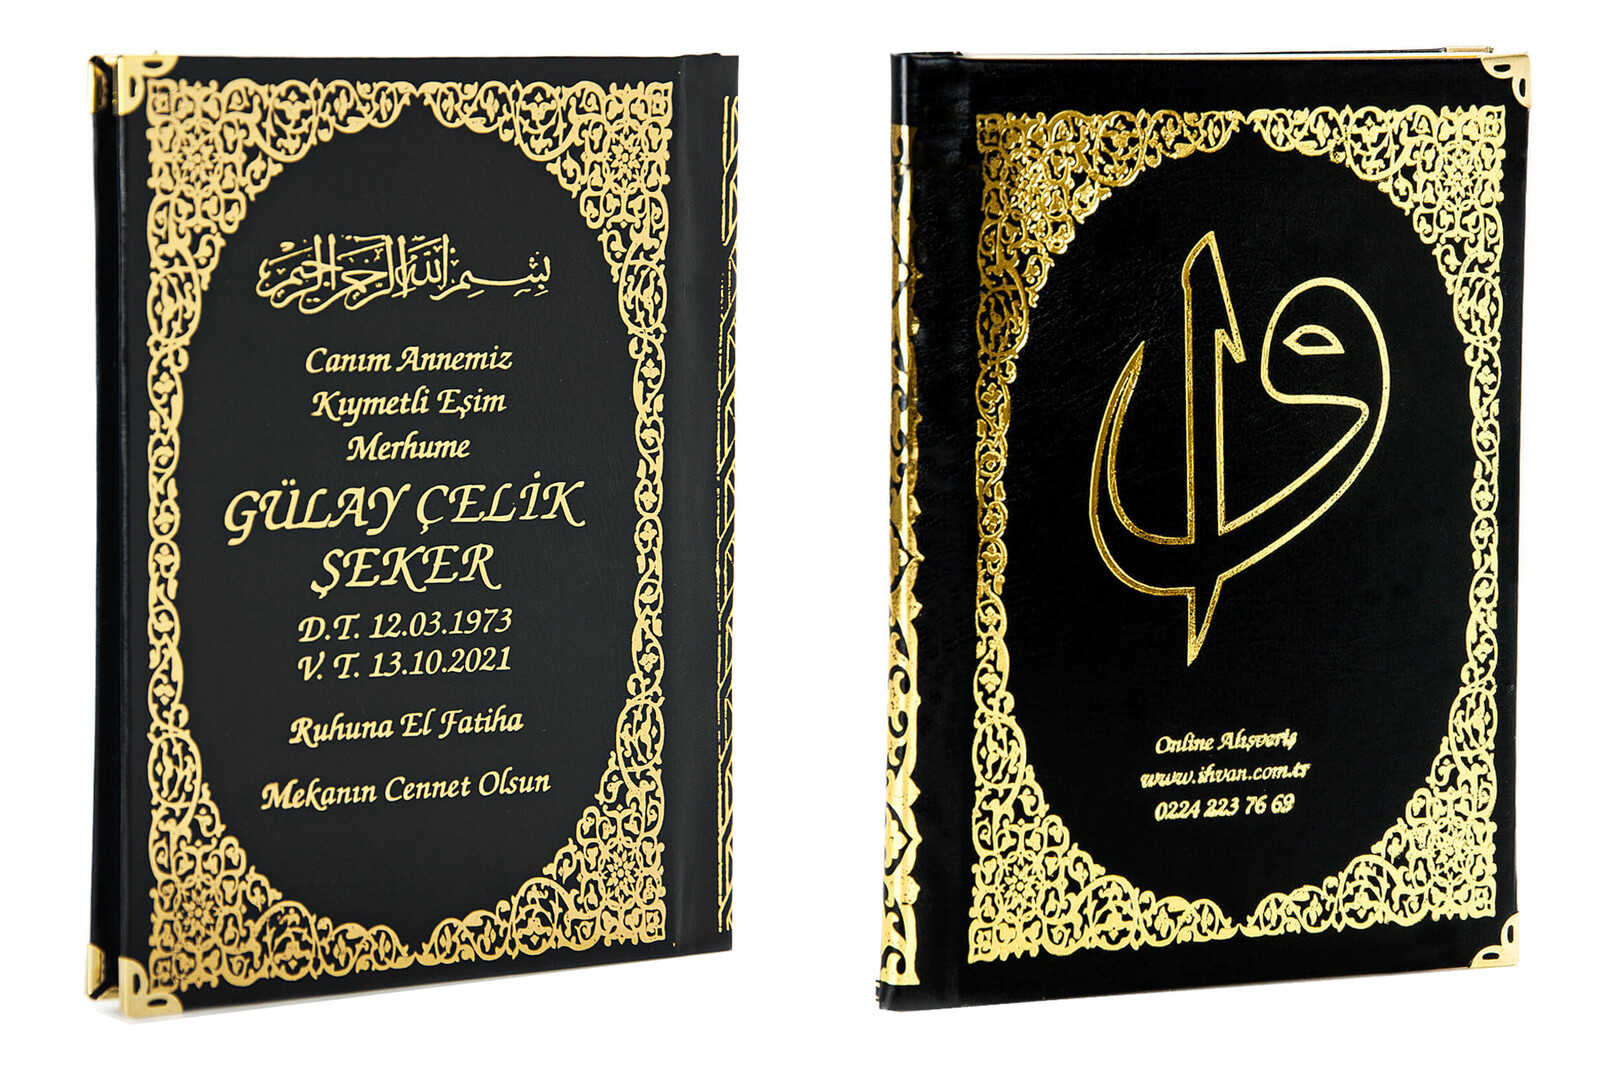 Name Printed Hardlied Yasin Book - Medium Size - 176 Pages - Black Color - Religious Gift - Thumbnail